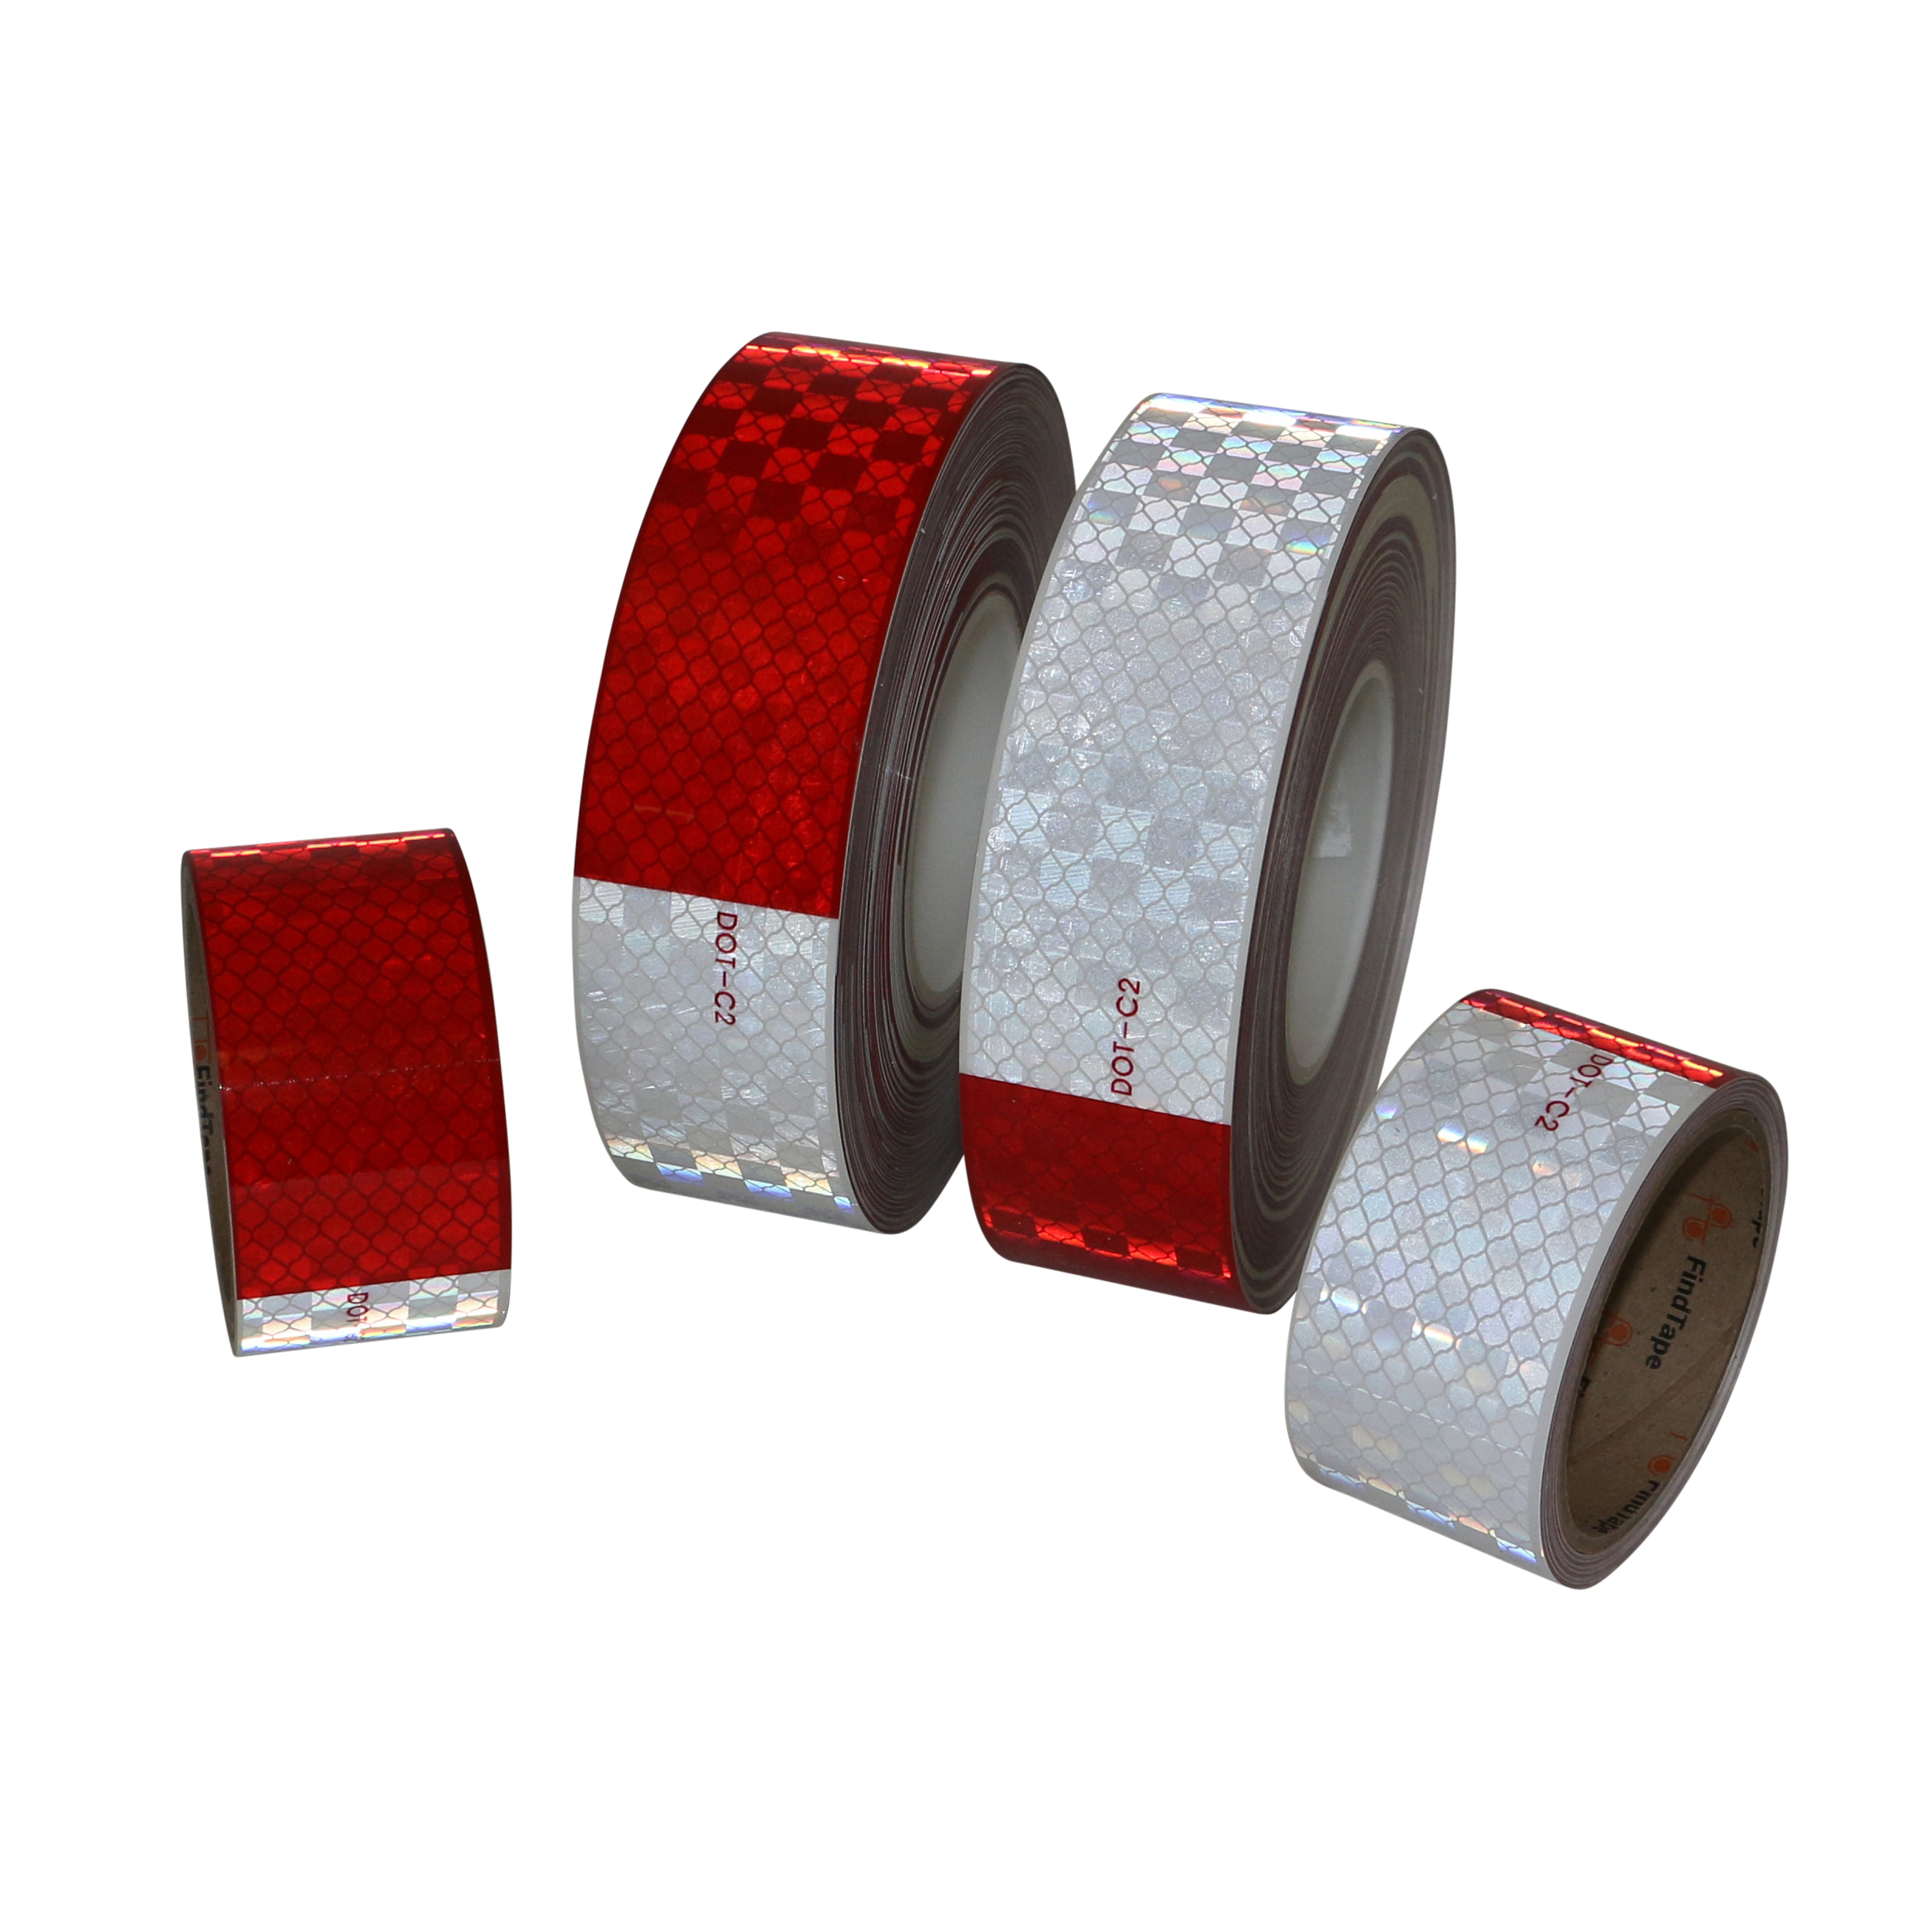 BRIGHT RED  Reflective   Conspicuity  Tape 1" x 40' 